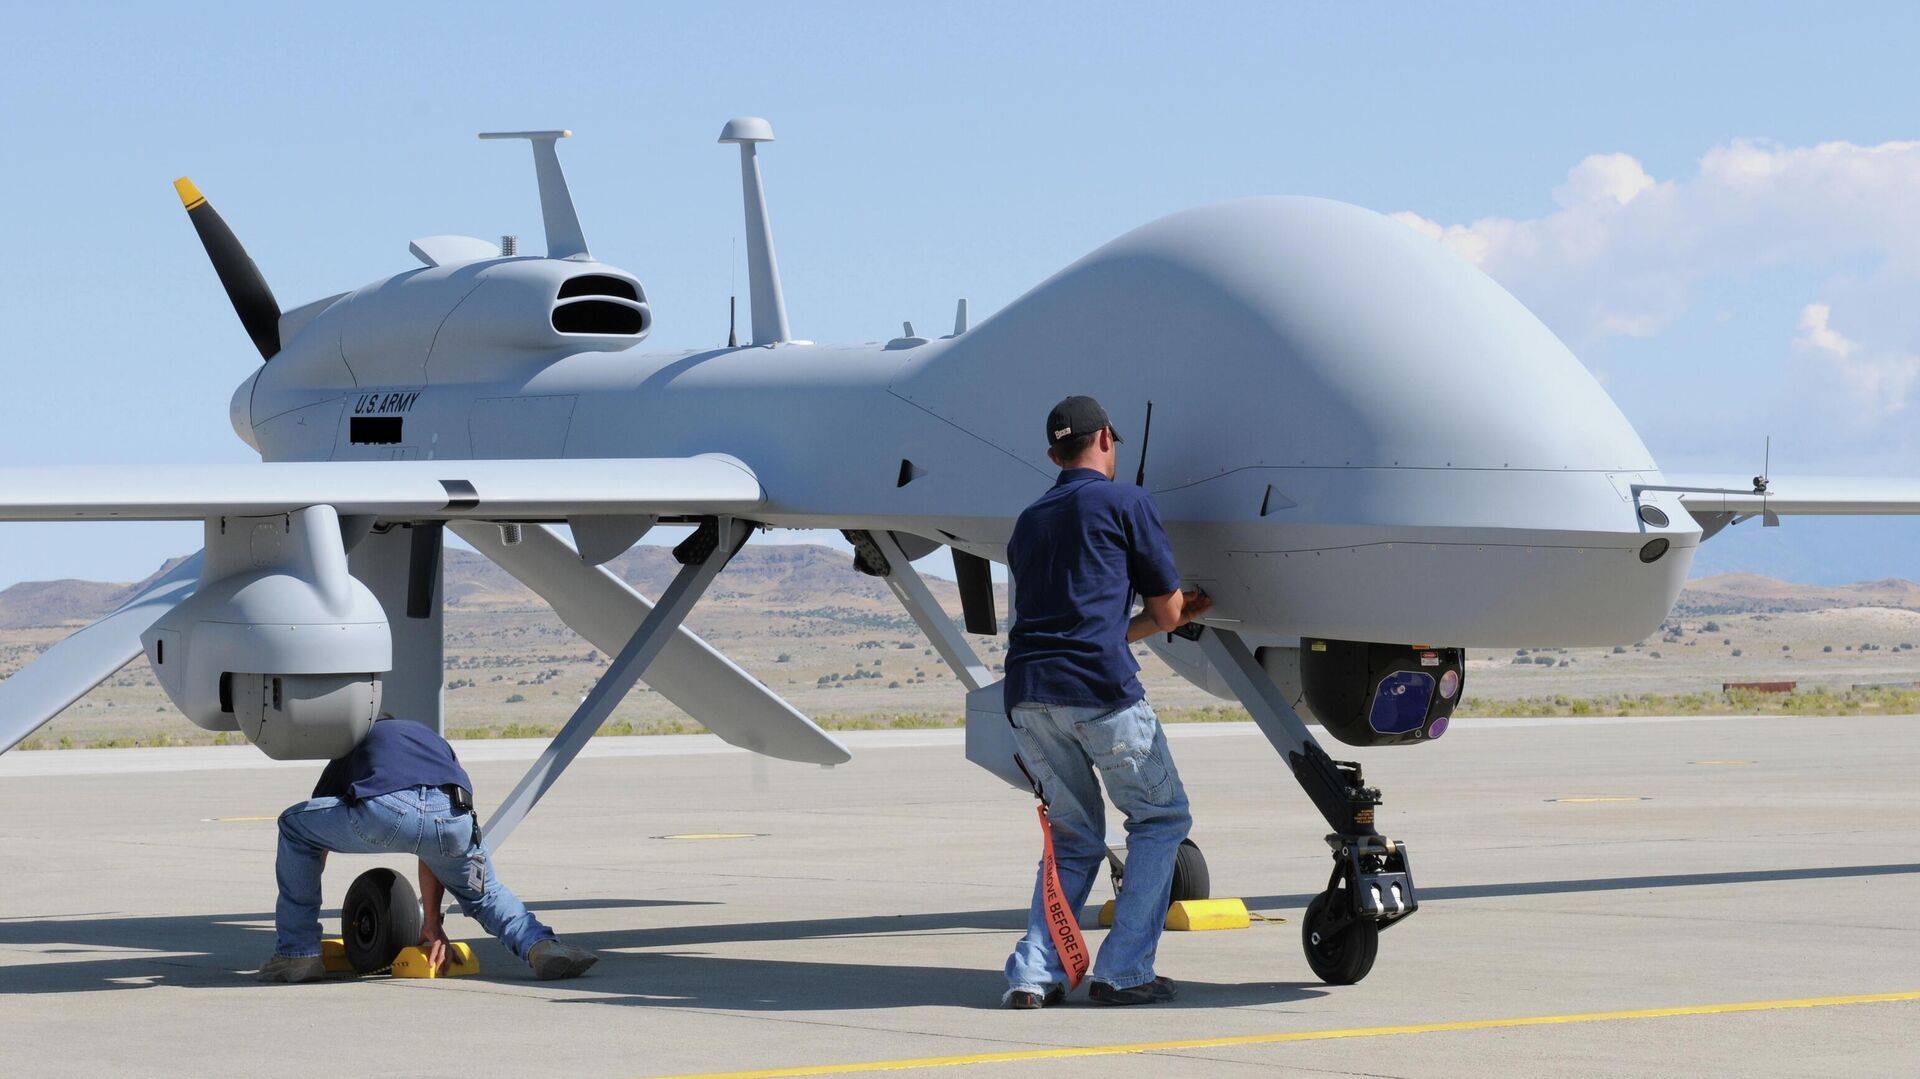 Mq-1c gray eagle er/mp unmanned aircraft system (uas) - army technology